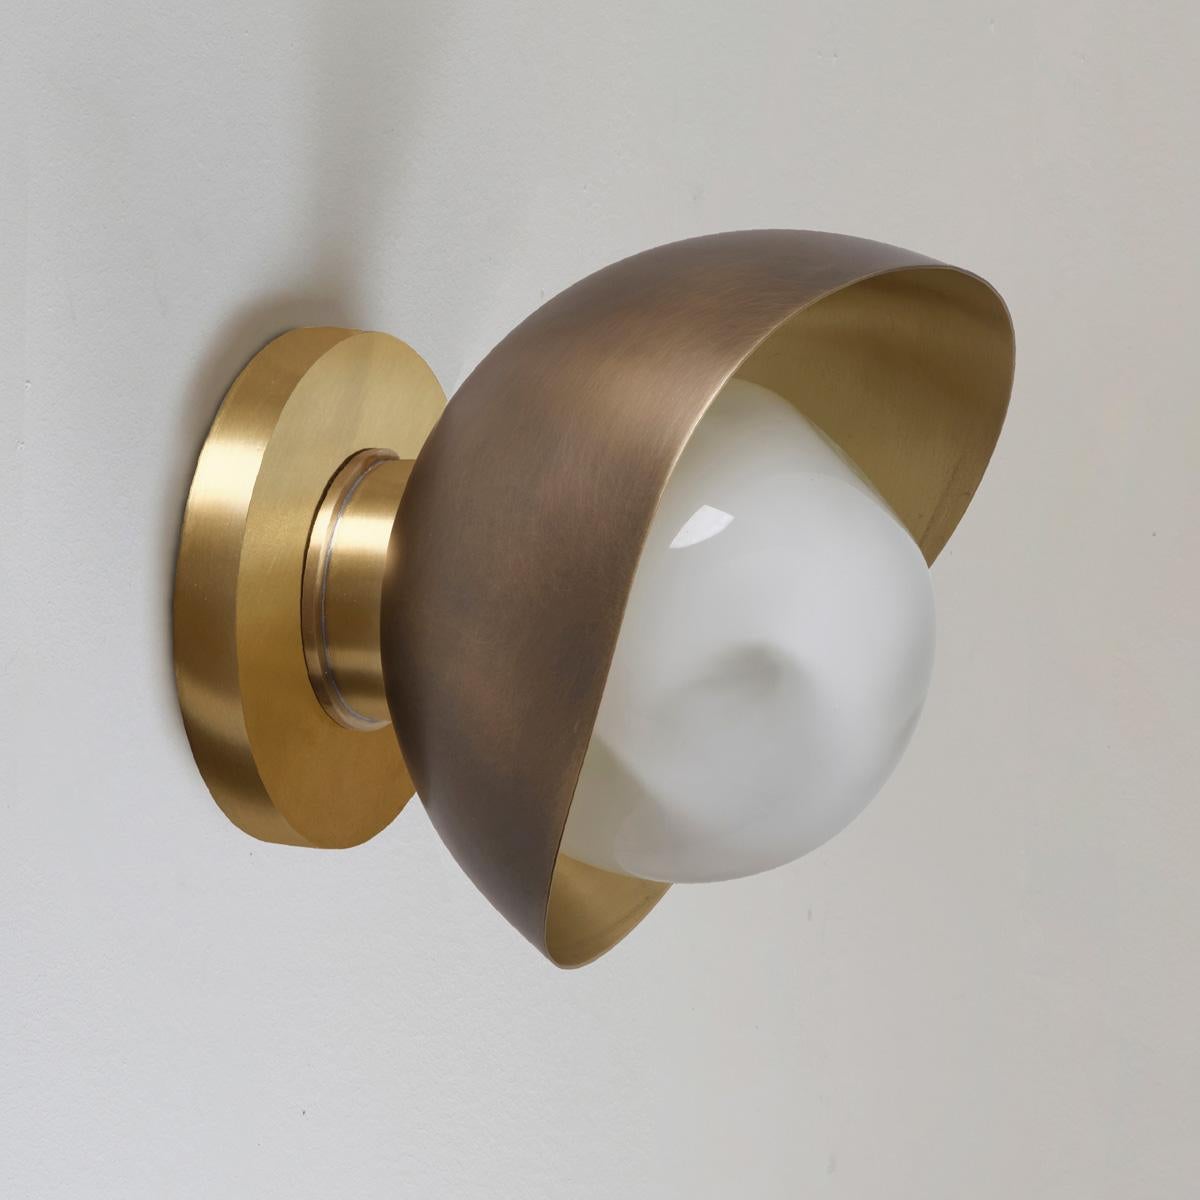 Contemporary Perla Mini Wall Light by Gaspare Asaro. Powder Pink and Satin Brass Finish For Sale